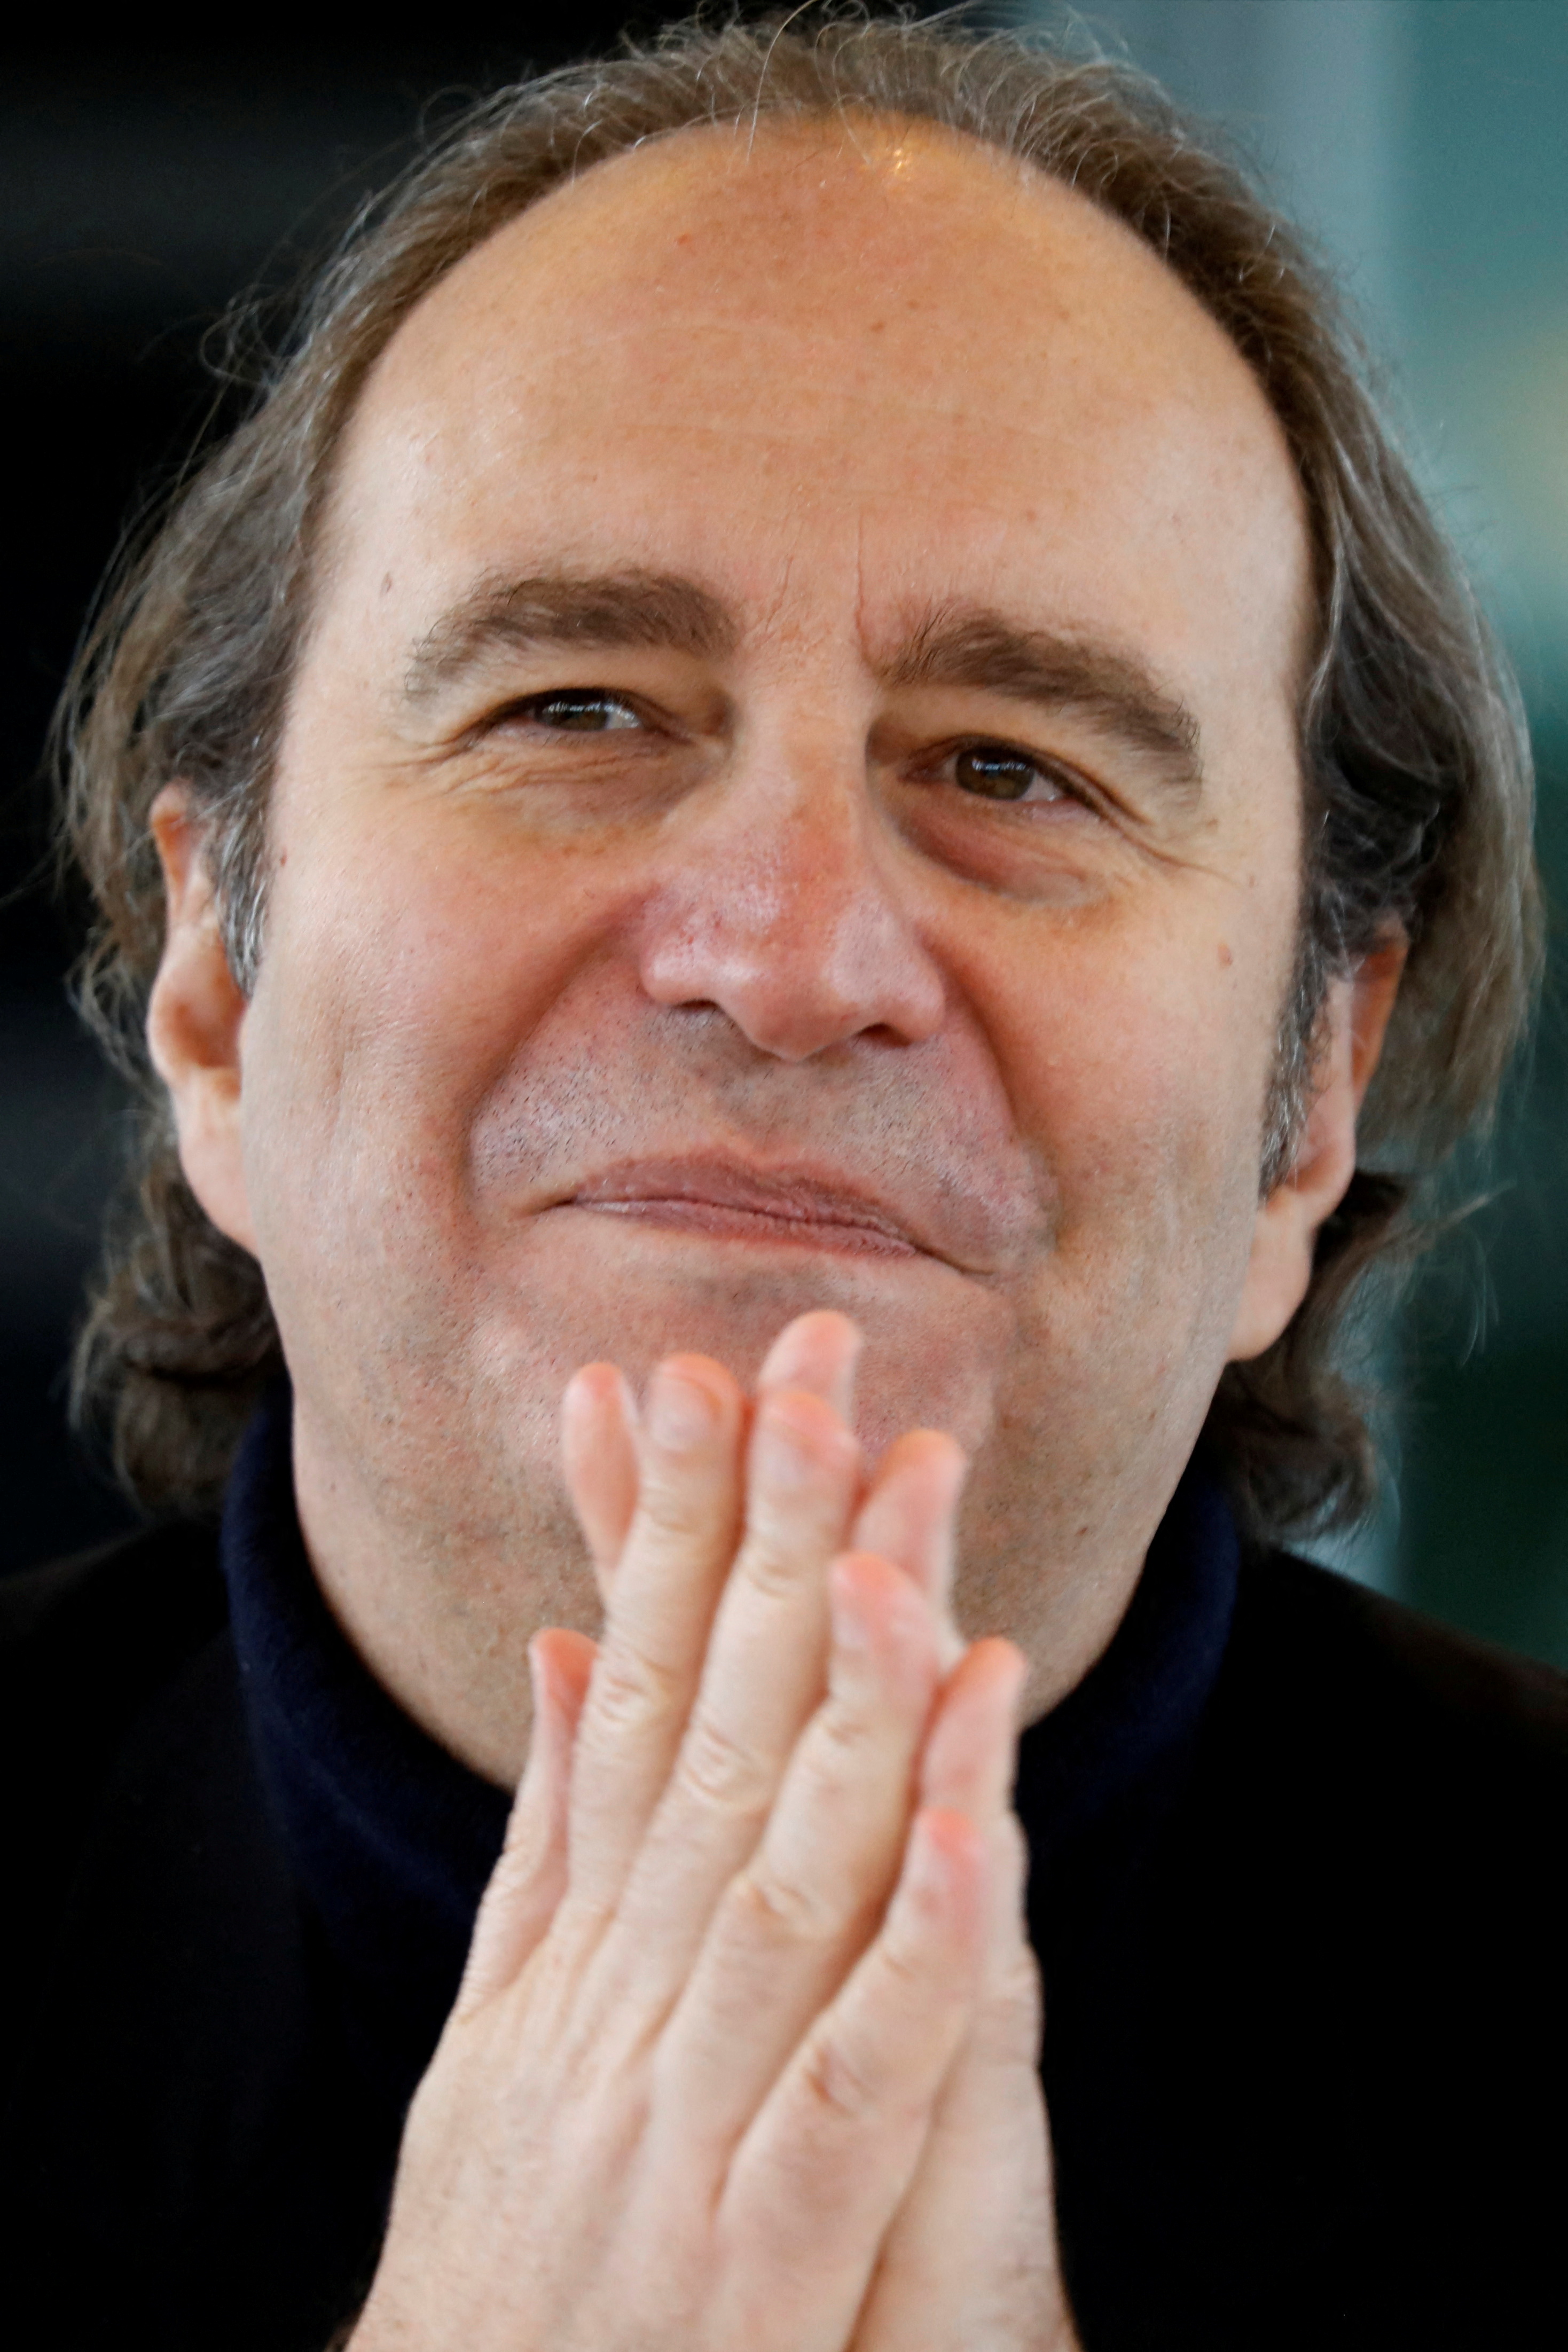 Xavier Niel, founder and majority-owner of French broadband Internet provider Iliad attends the company's 2017 annual results presentation in Paris